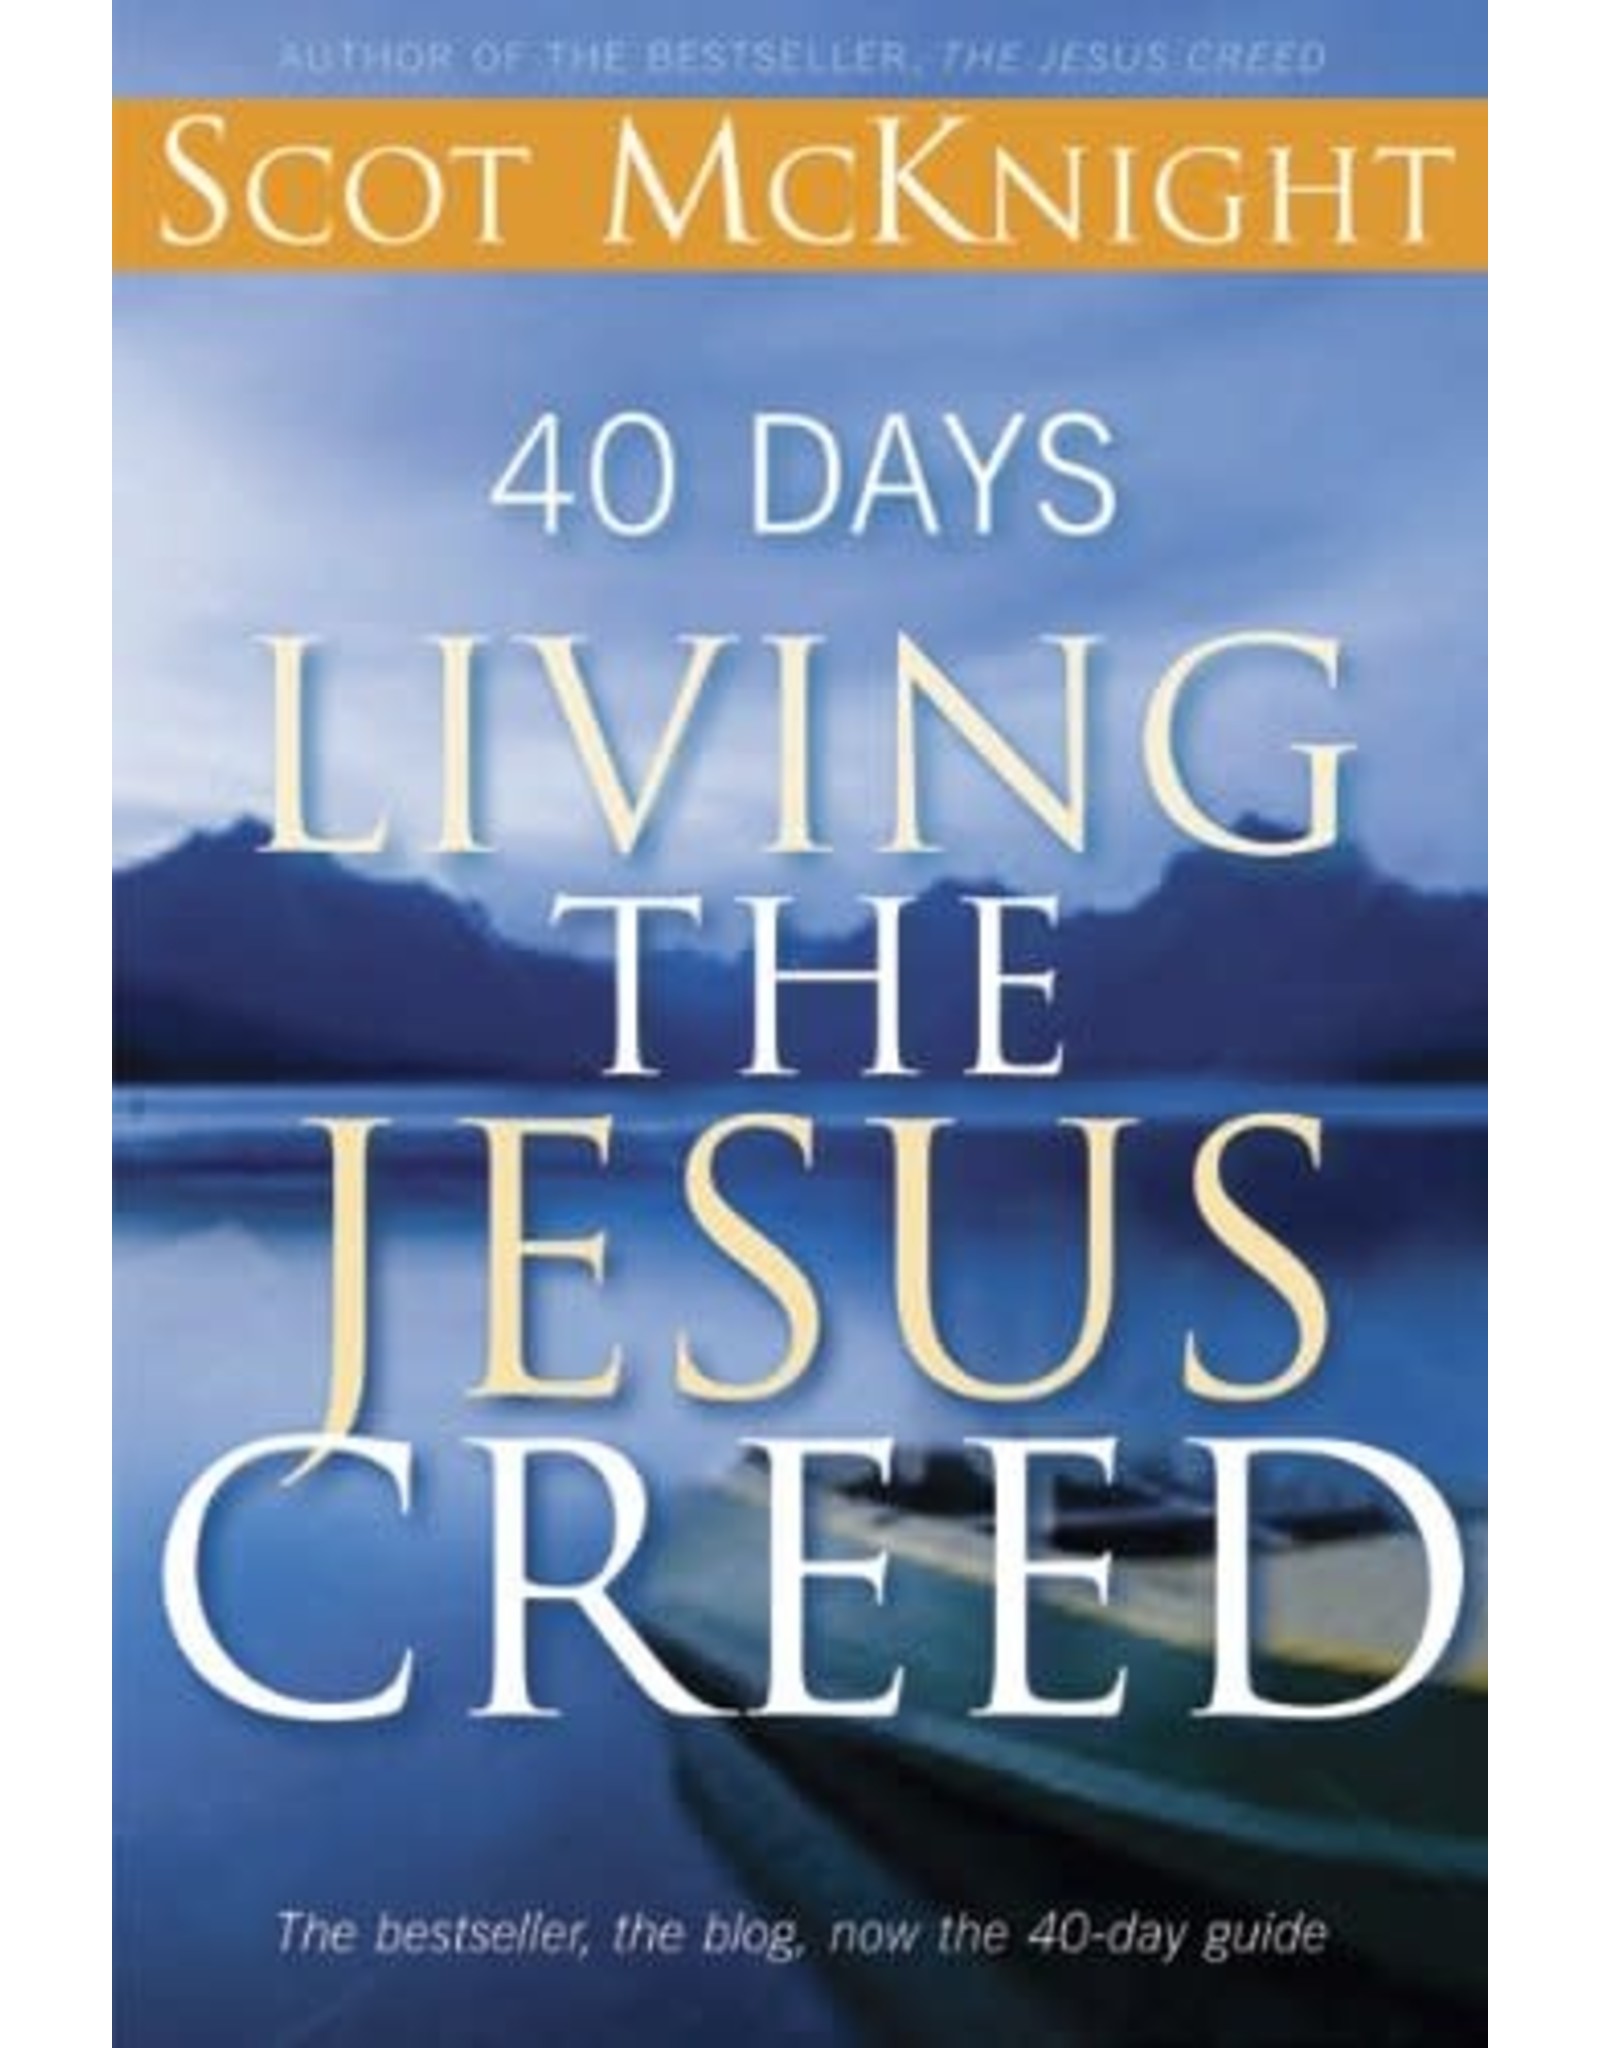 Paraclete Press 40 Days Living the Jesus Creed by Scot McKnight (Paperback)